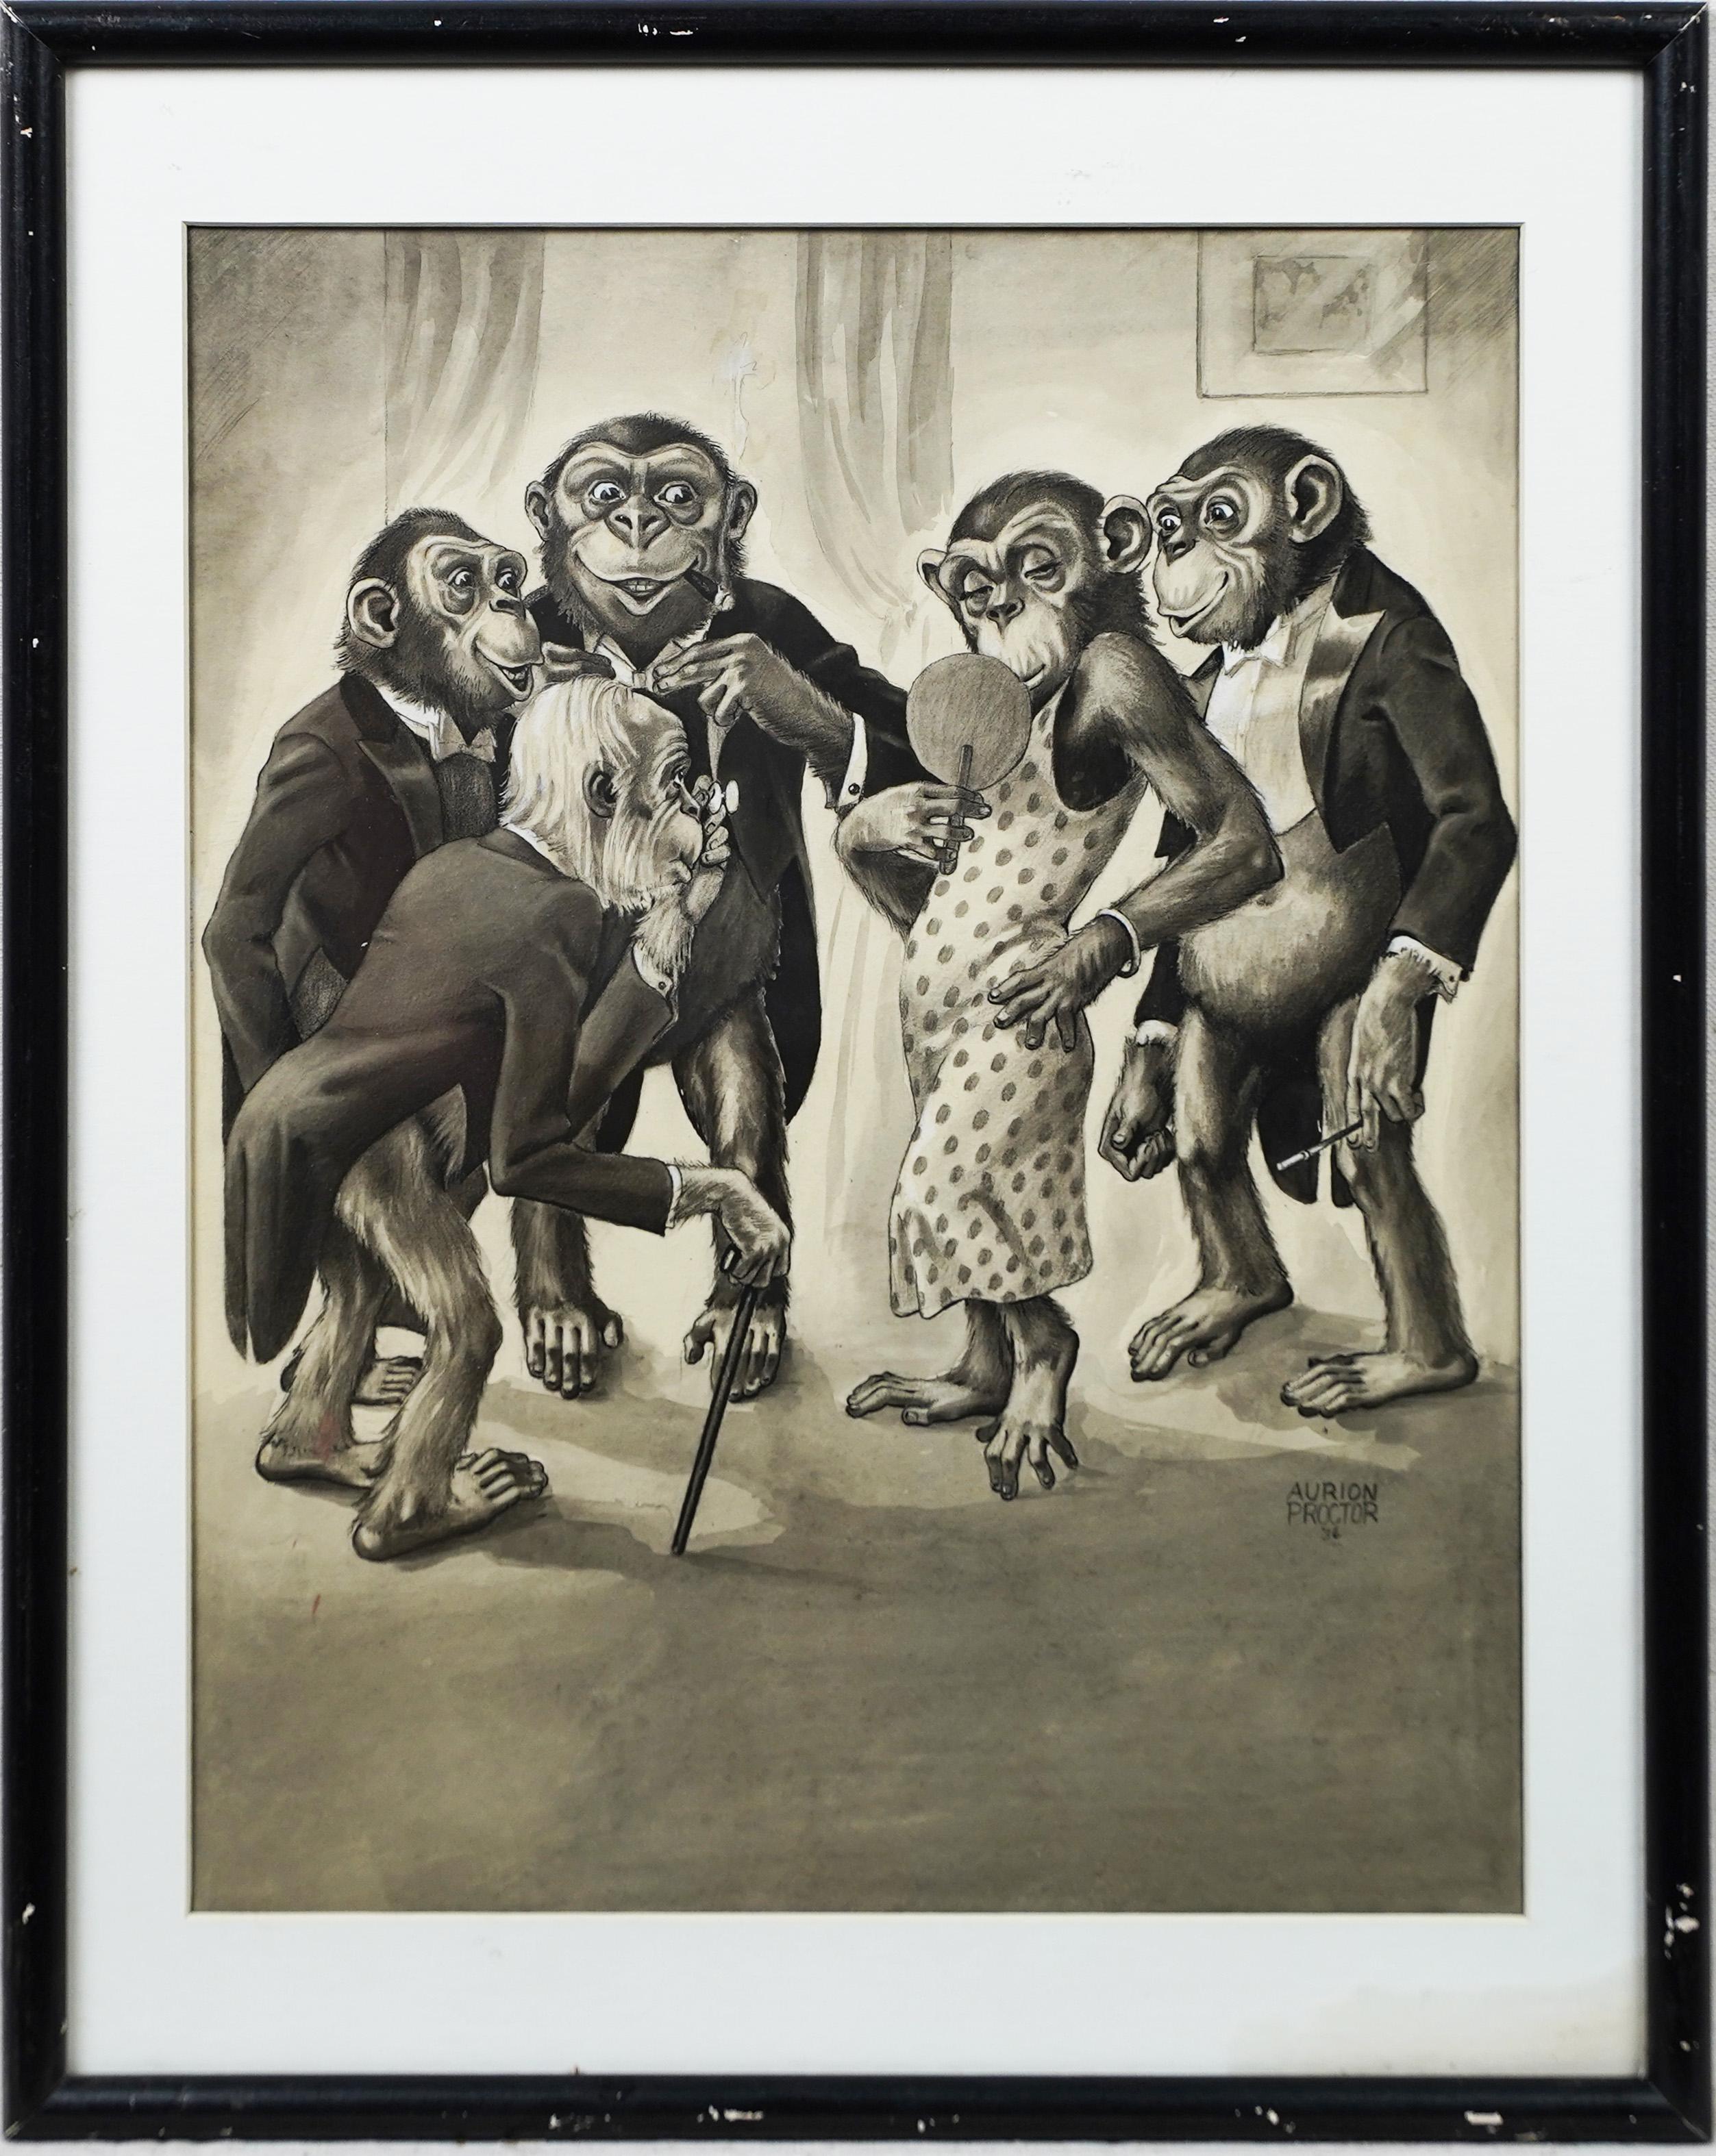 Antique American Surreal Anamorphic Signed Beautiful Monkey Humorous Drawing  - Painting by Aurion M. Proctor